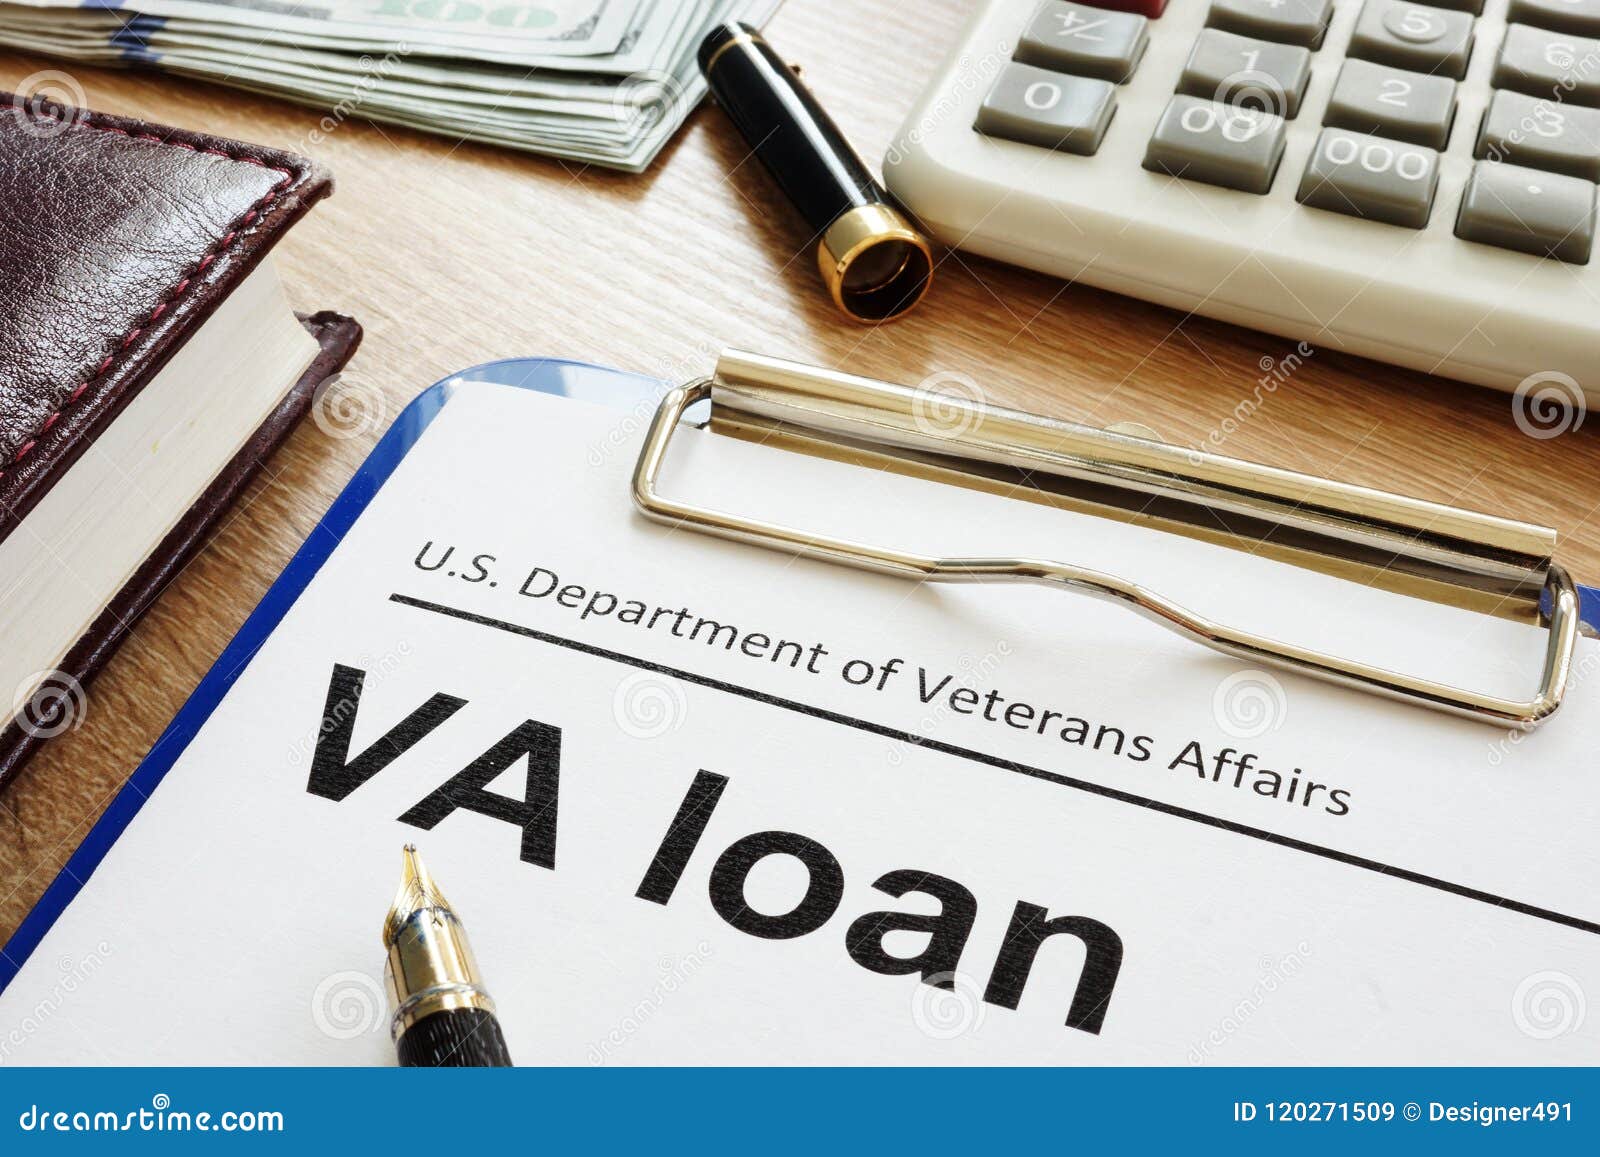 va loan u.s. department of veterans affairs form with clipboard.